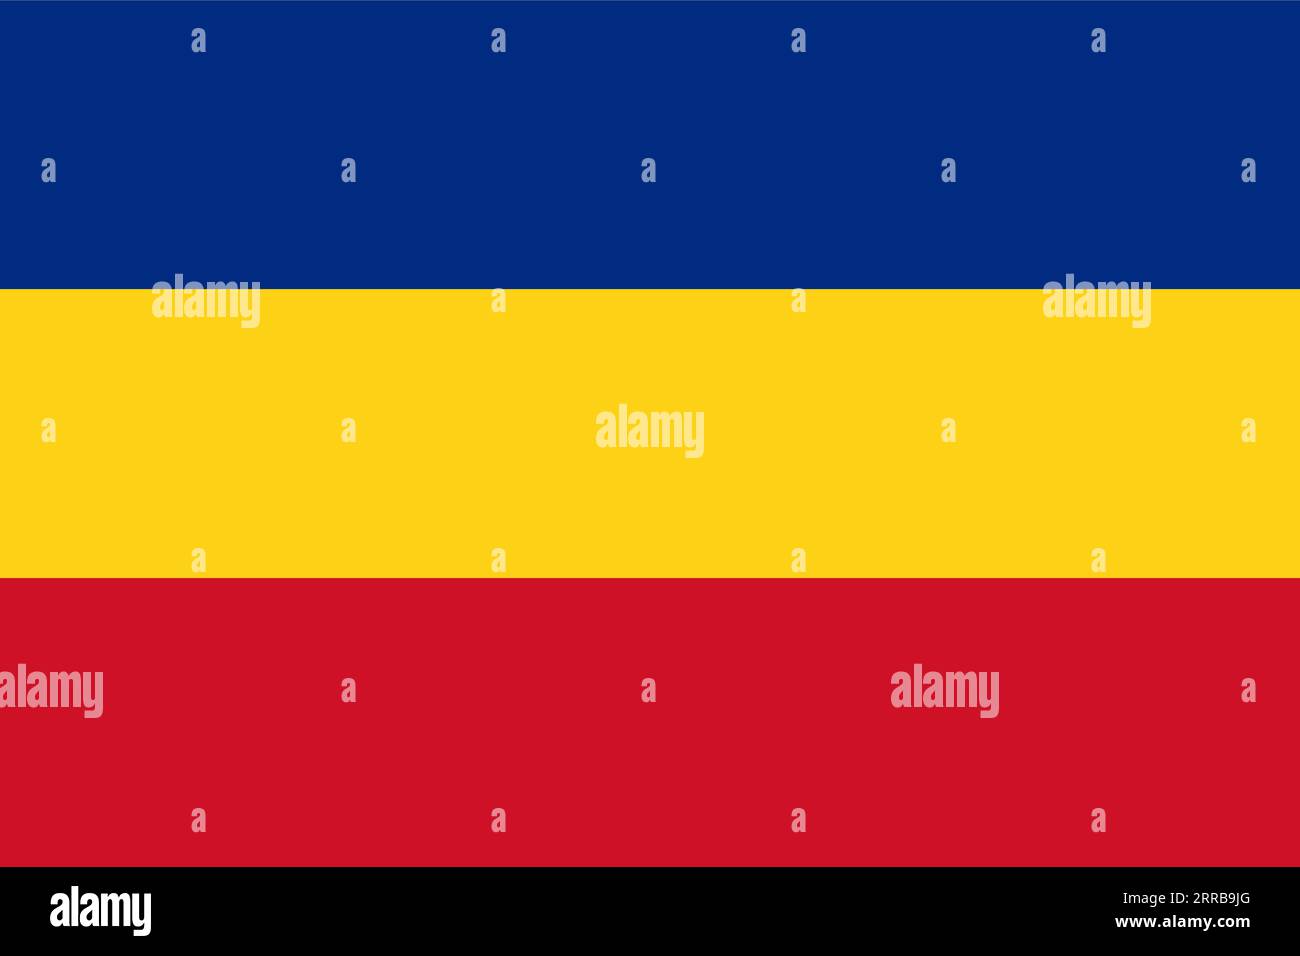 Vector Illustration of the Historical Timeline Flag of the United Principalities of Wallachia and Moldavia from 1859 to 1862 Stock Vector